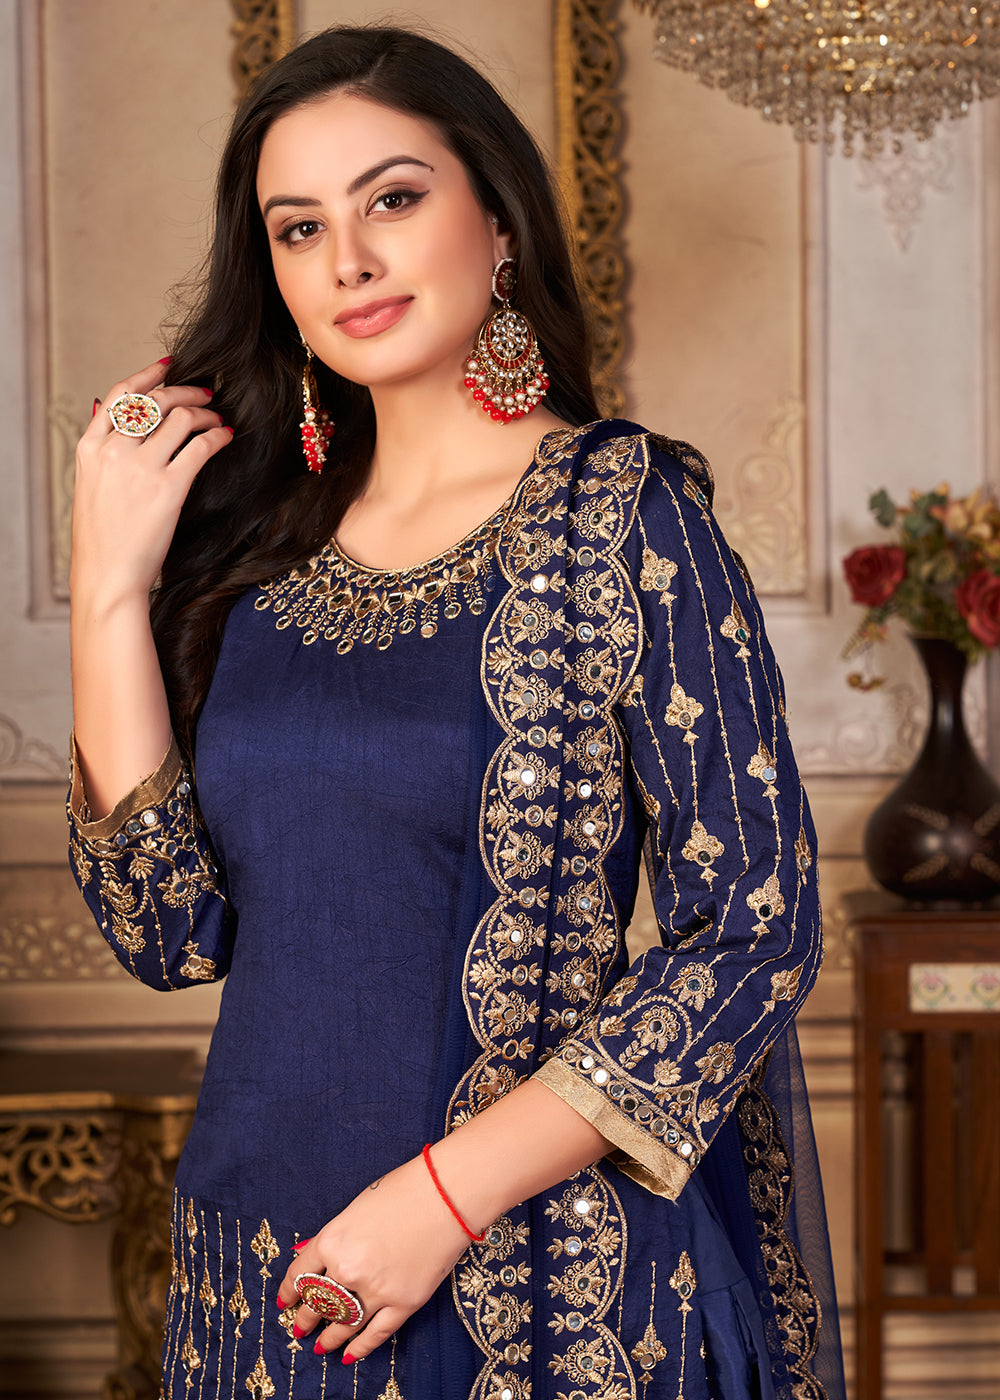 Buy Now Blue Patiala Style Silk Crafted Punjabi Salwar Suit Online in USA, UK, Canada & Worldwide at Empress Clothing